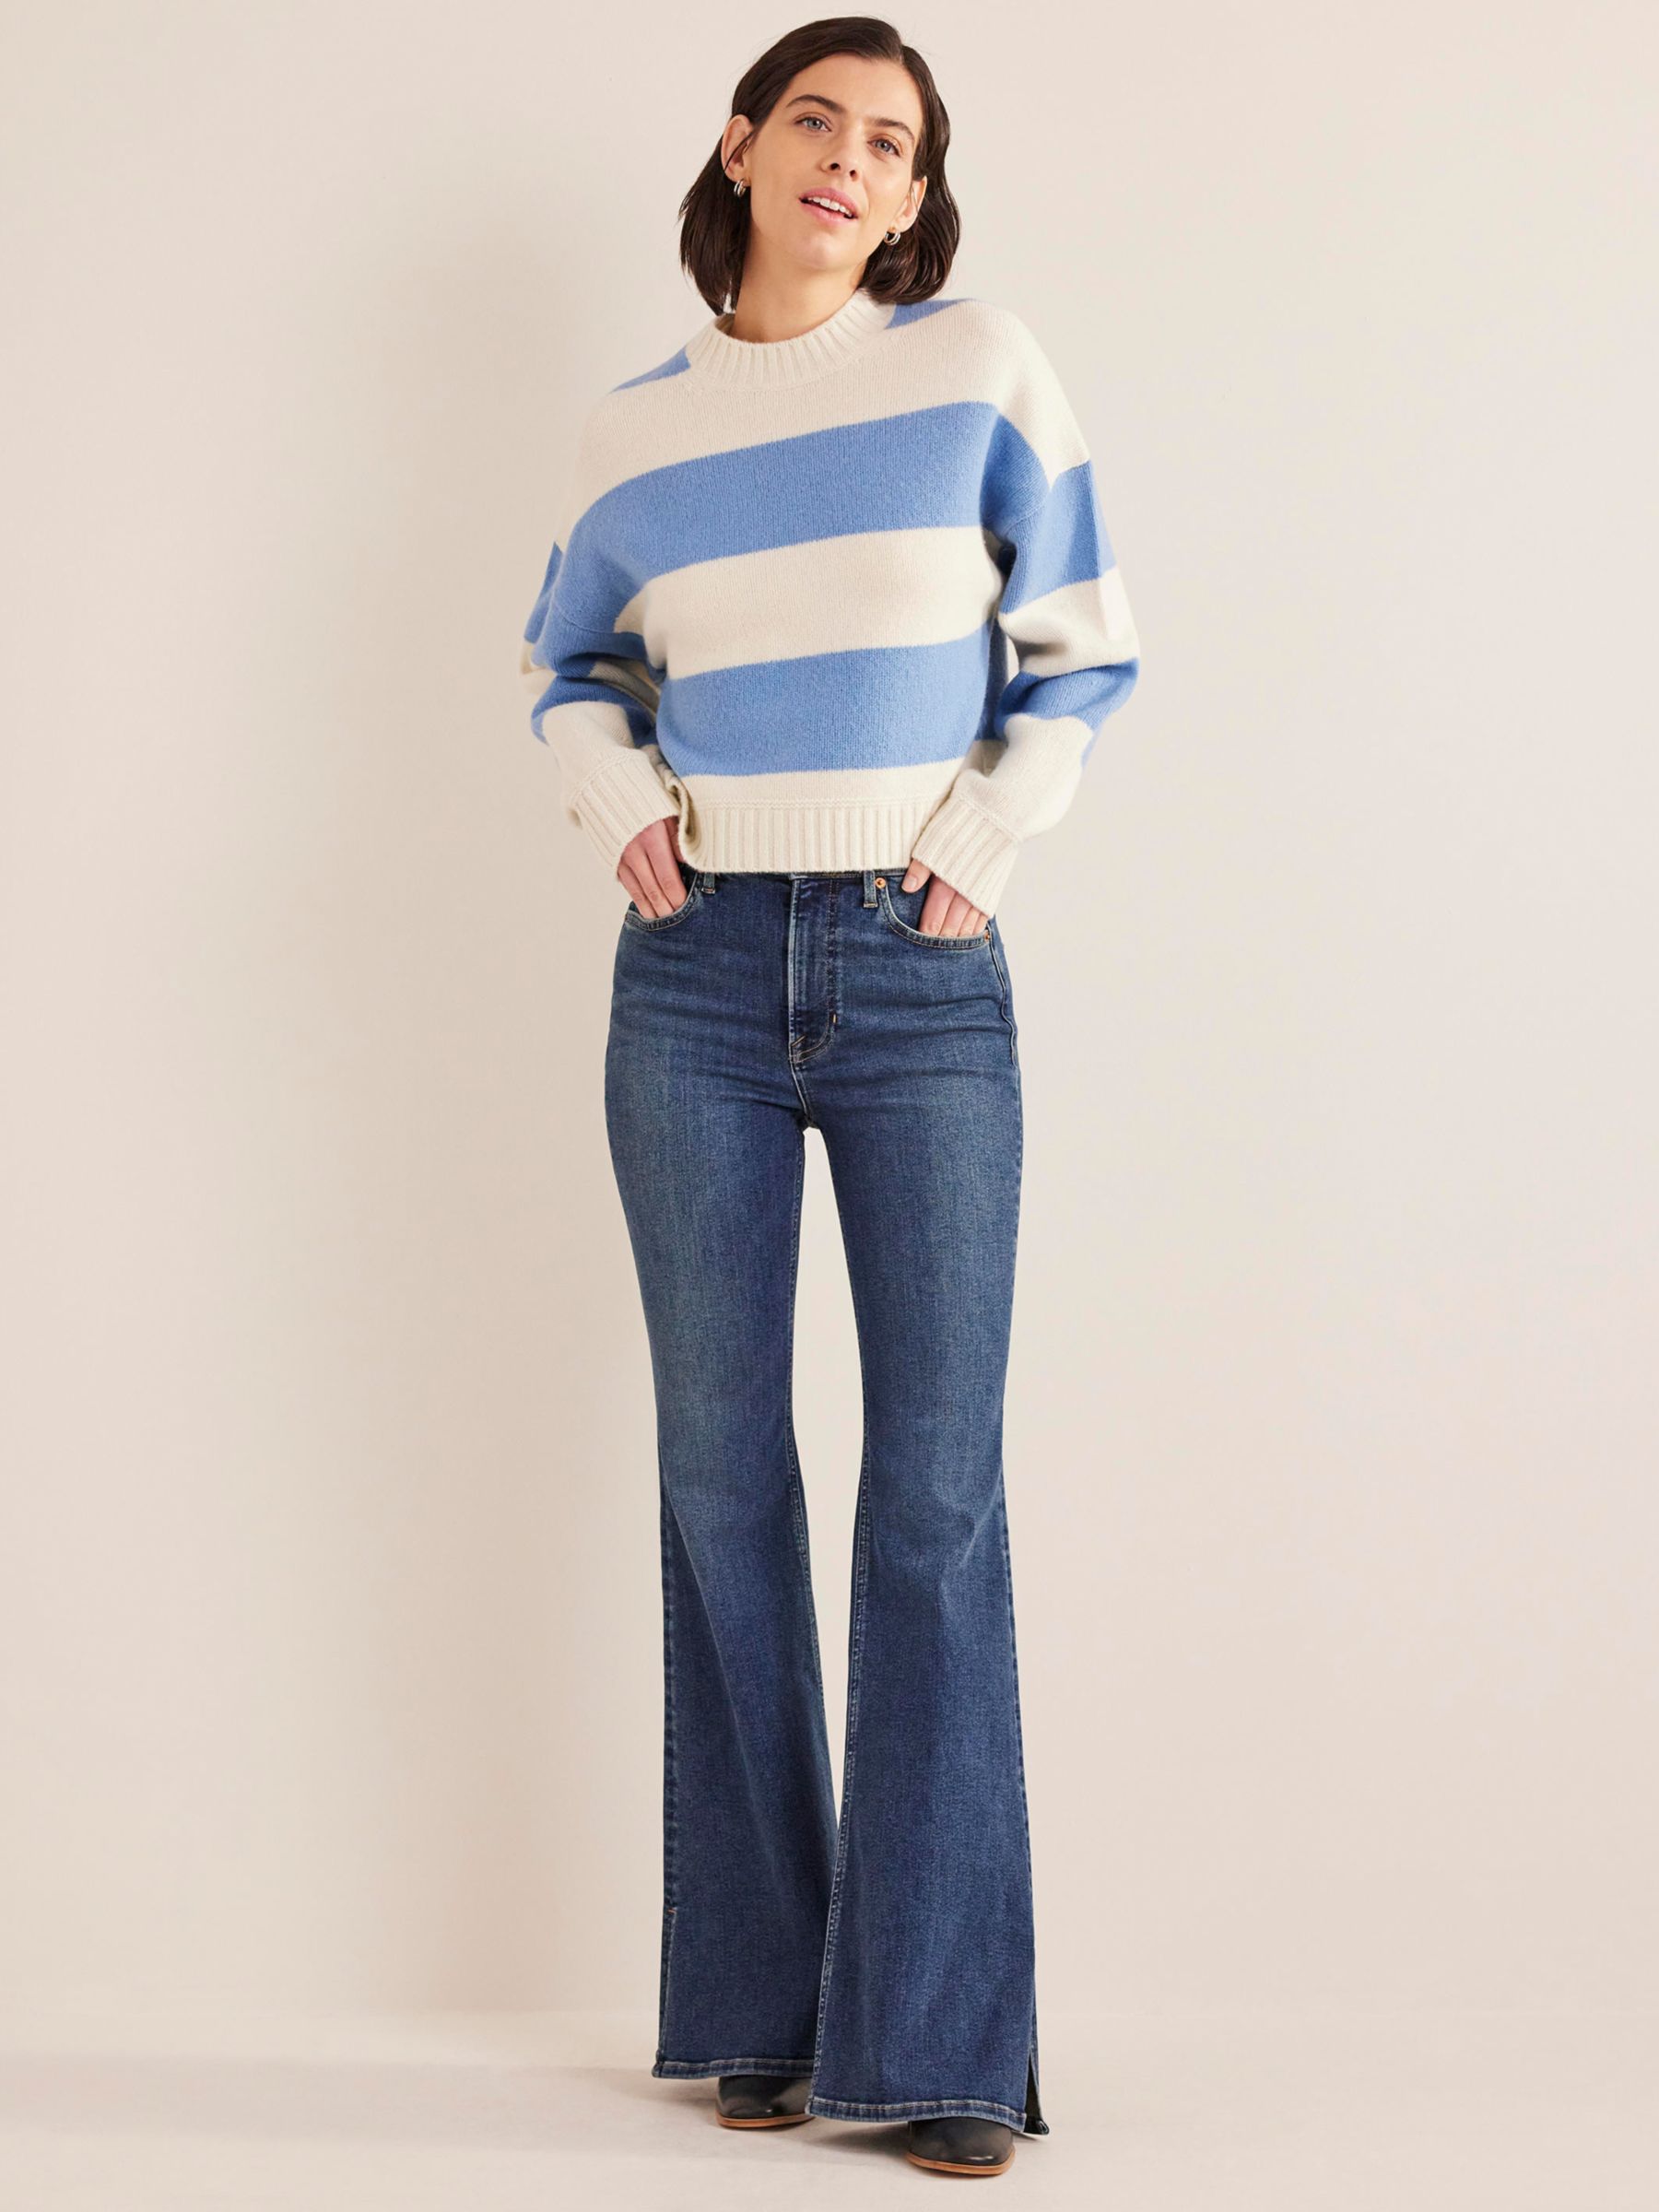 High Waisted Denim Split Flare Jeans - Sale from Yumi UK